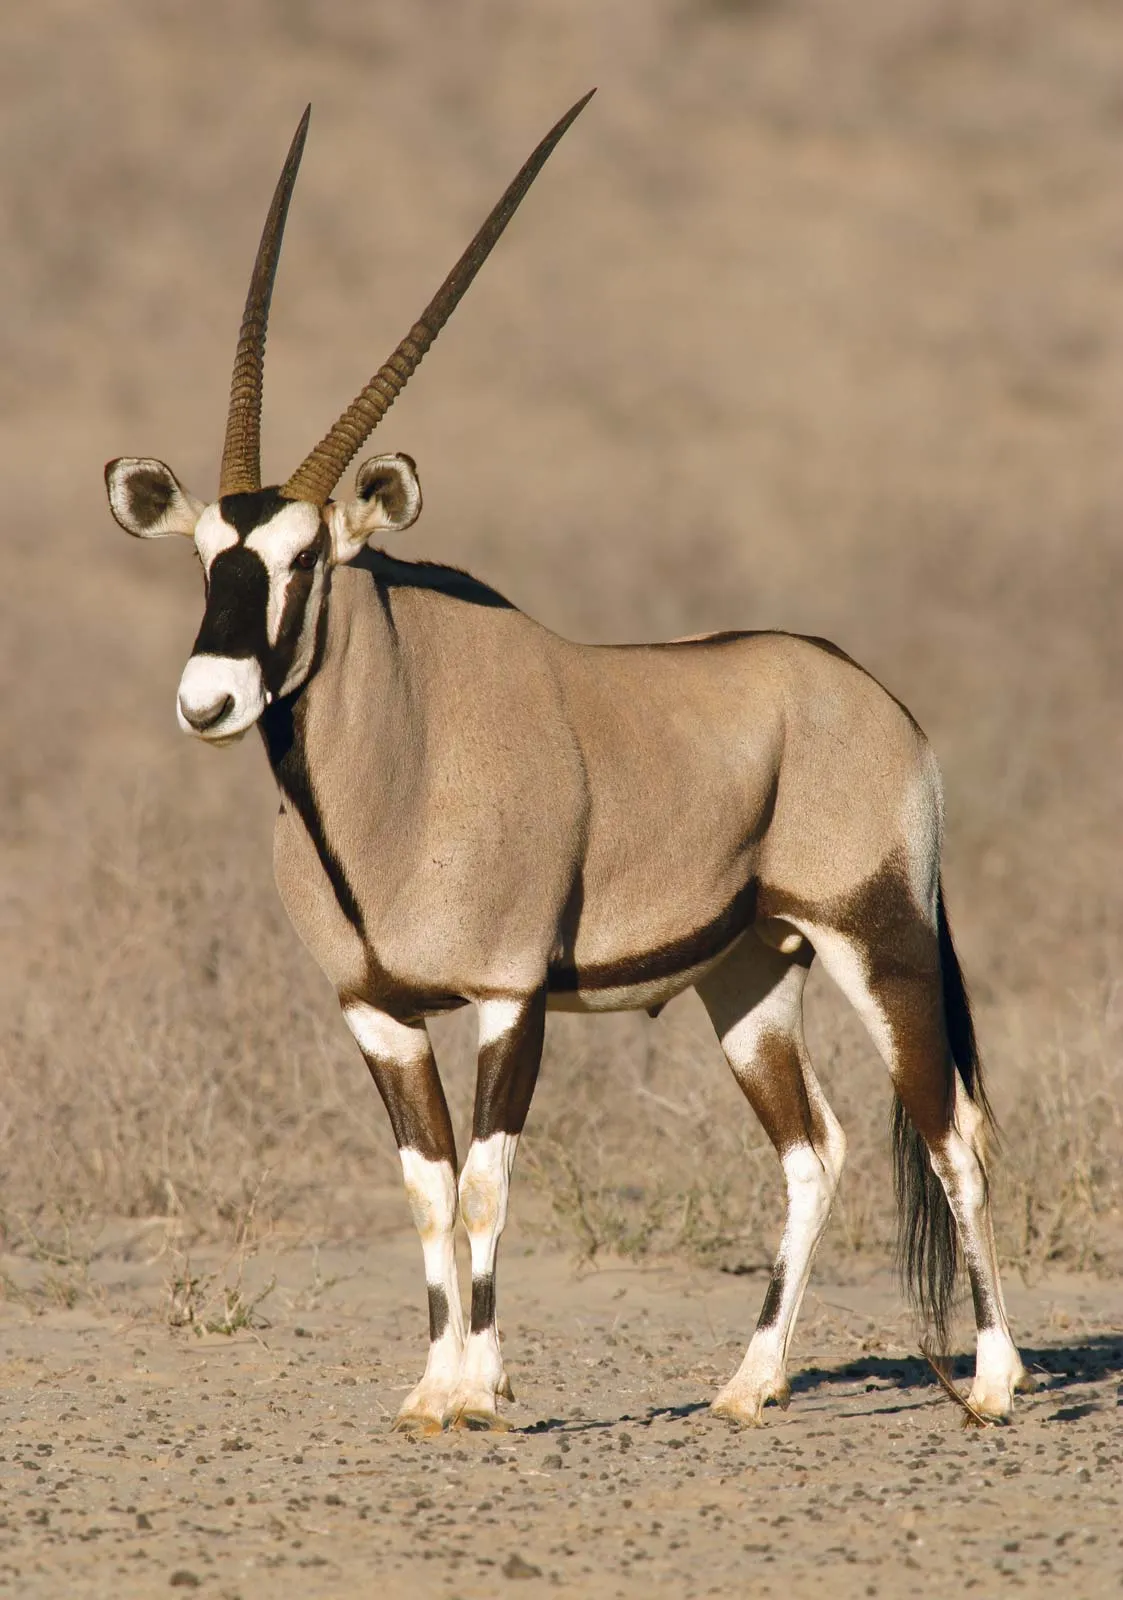 <p>species of antelope from Africa and Asia; long straight horns</p>